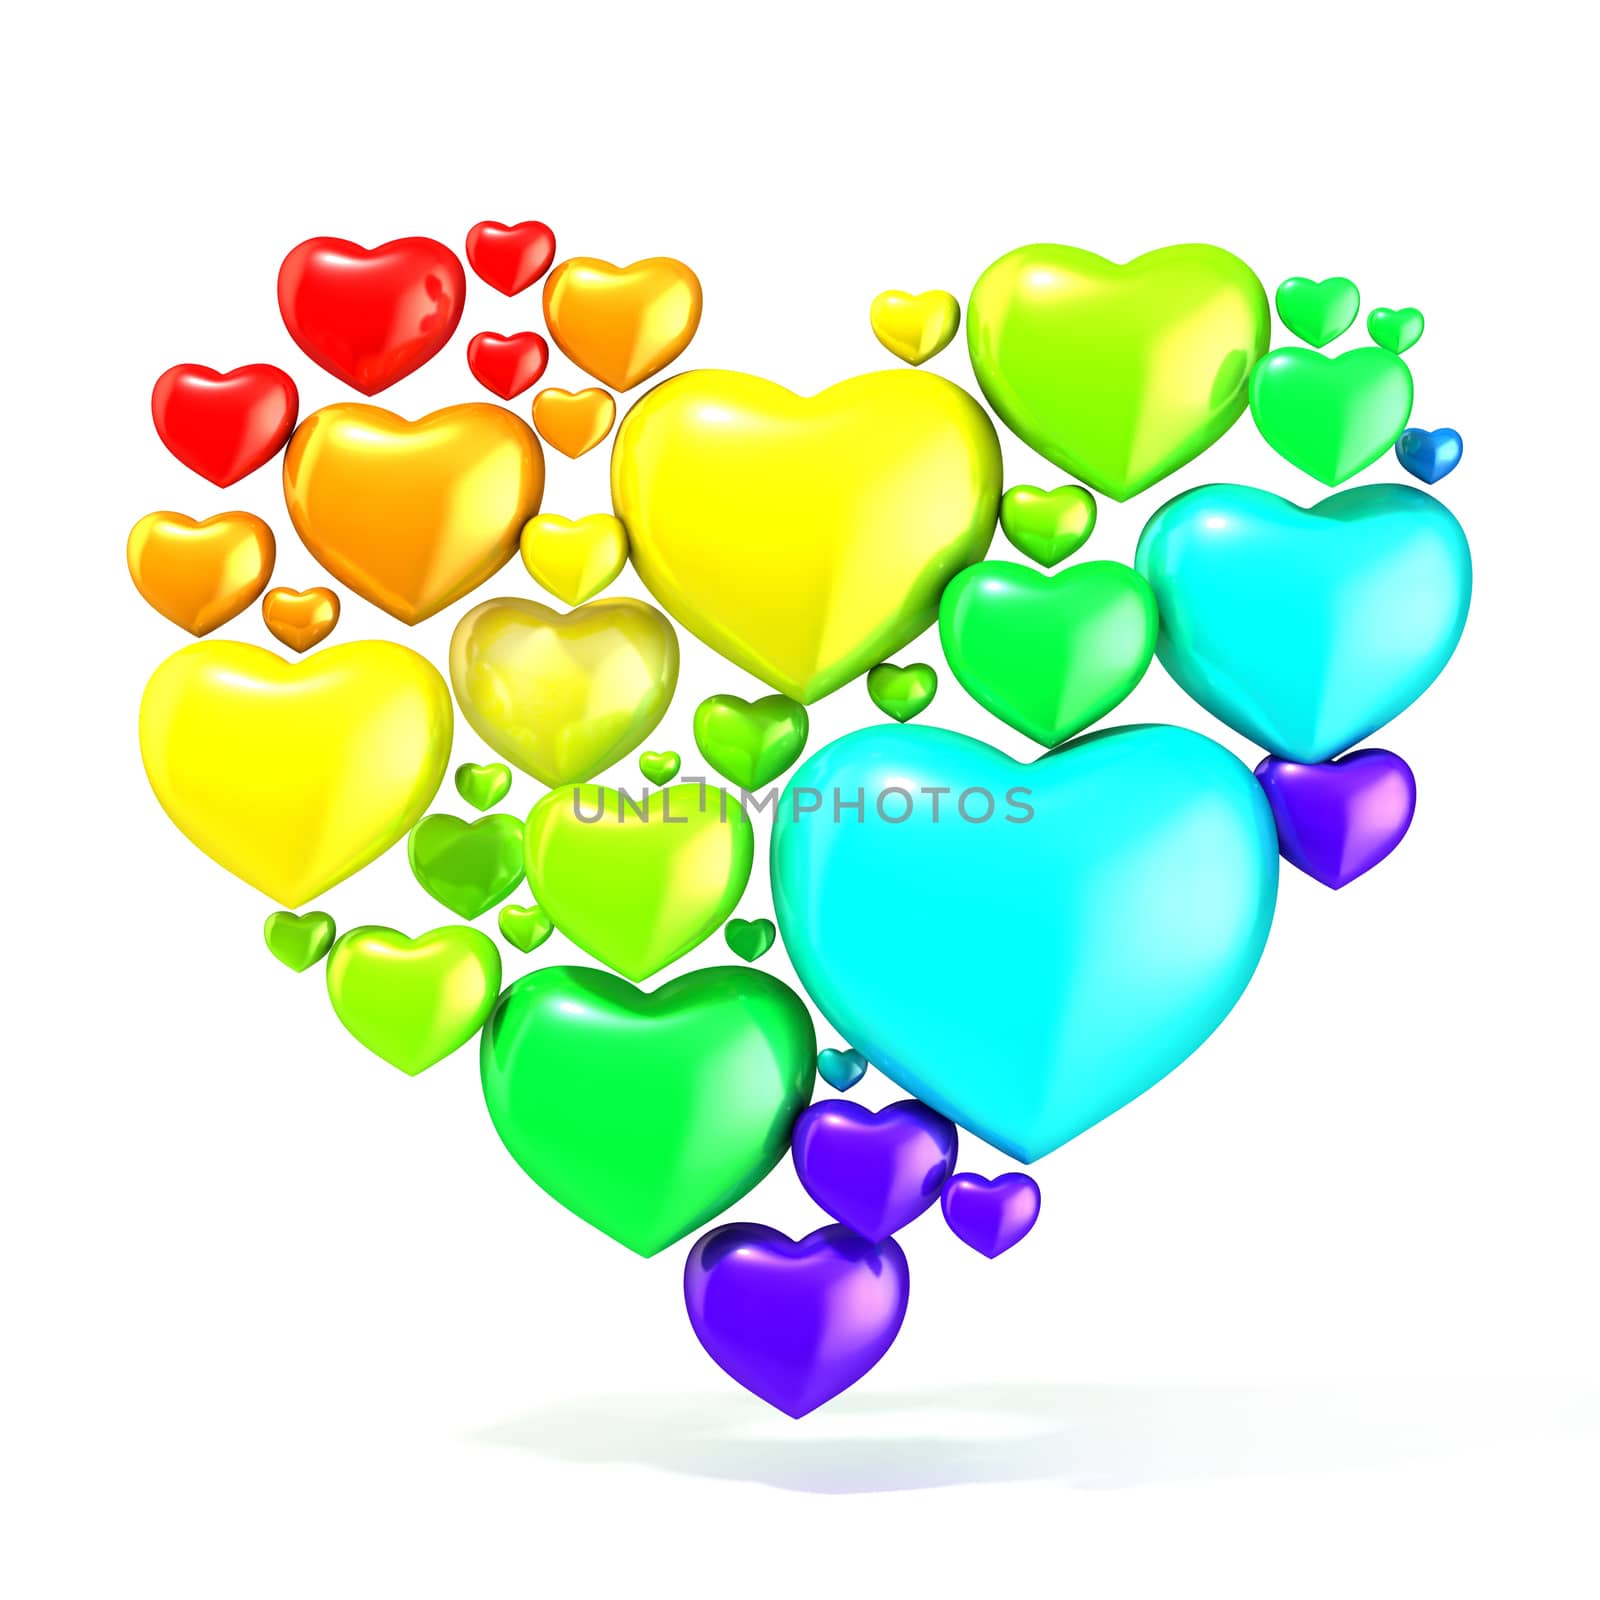 Sweet, colorful, beautiful hearts on white background, arranged  by djmilic